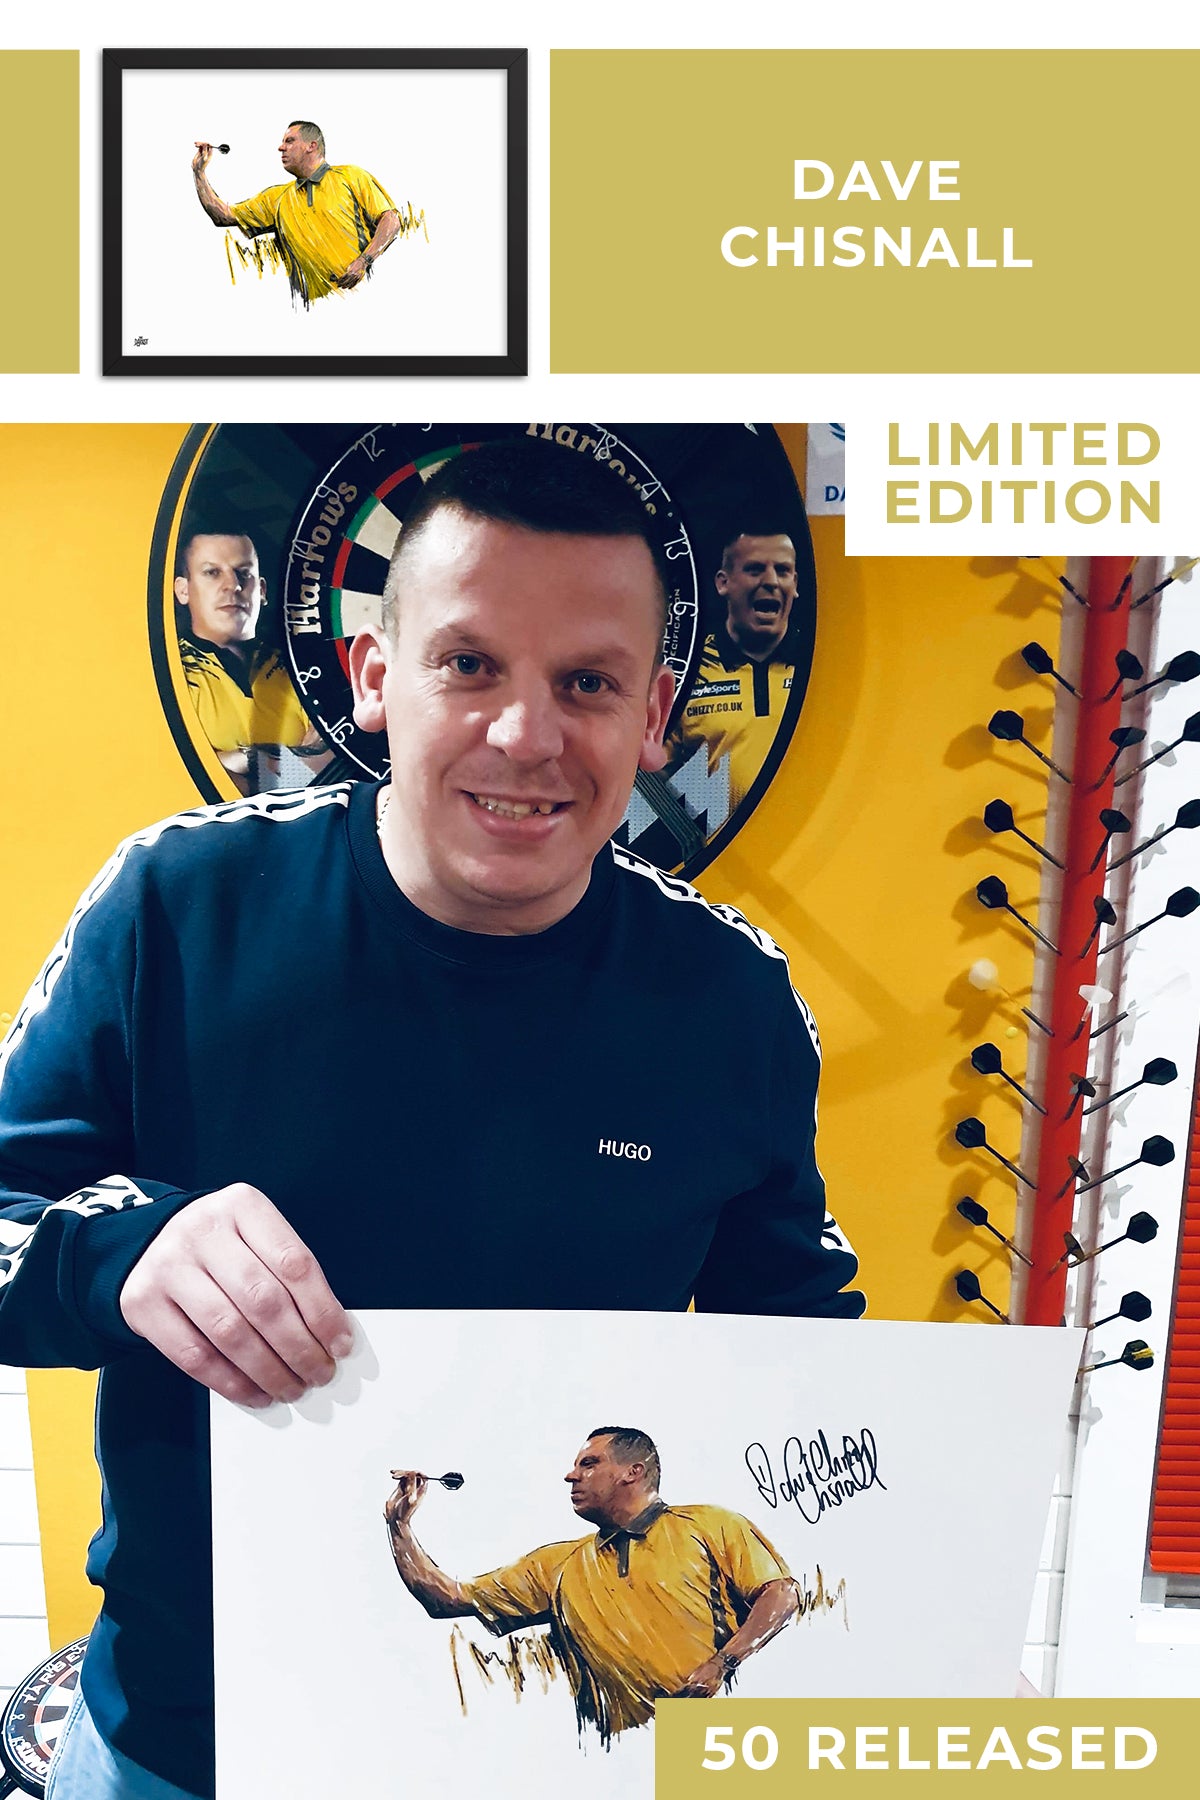 Dave Chisnall Limited Edition Signed Art Print - The Dartist